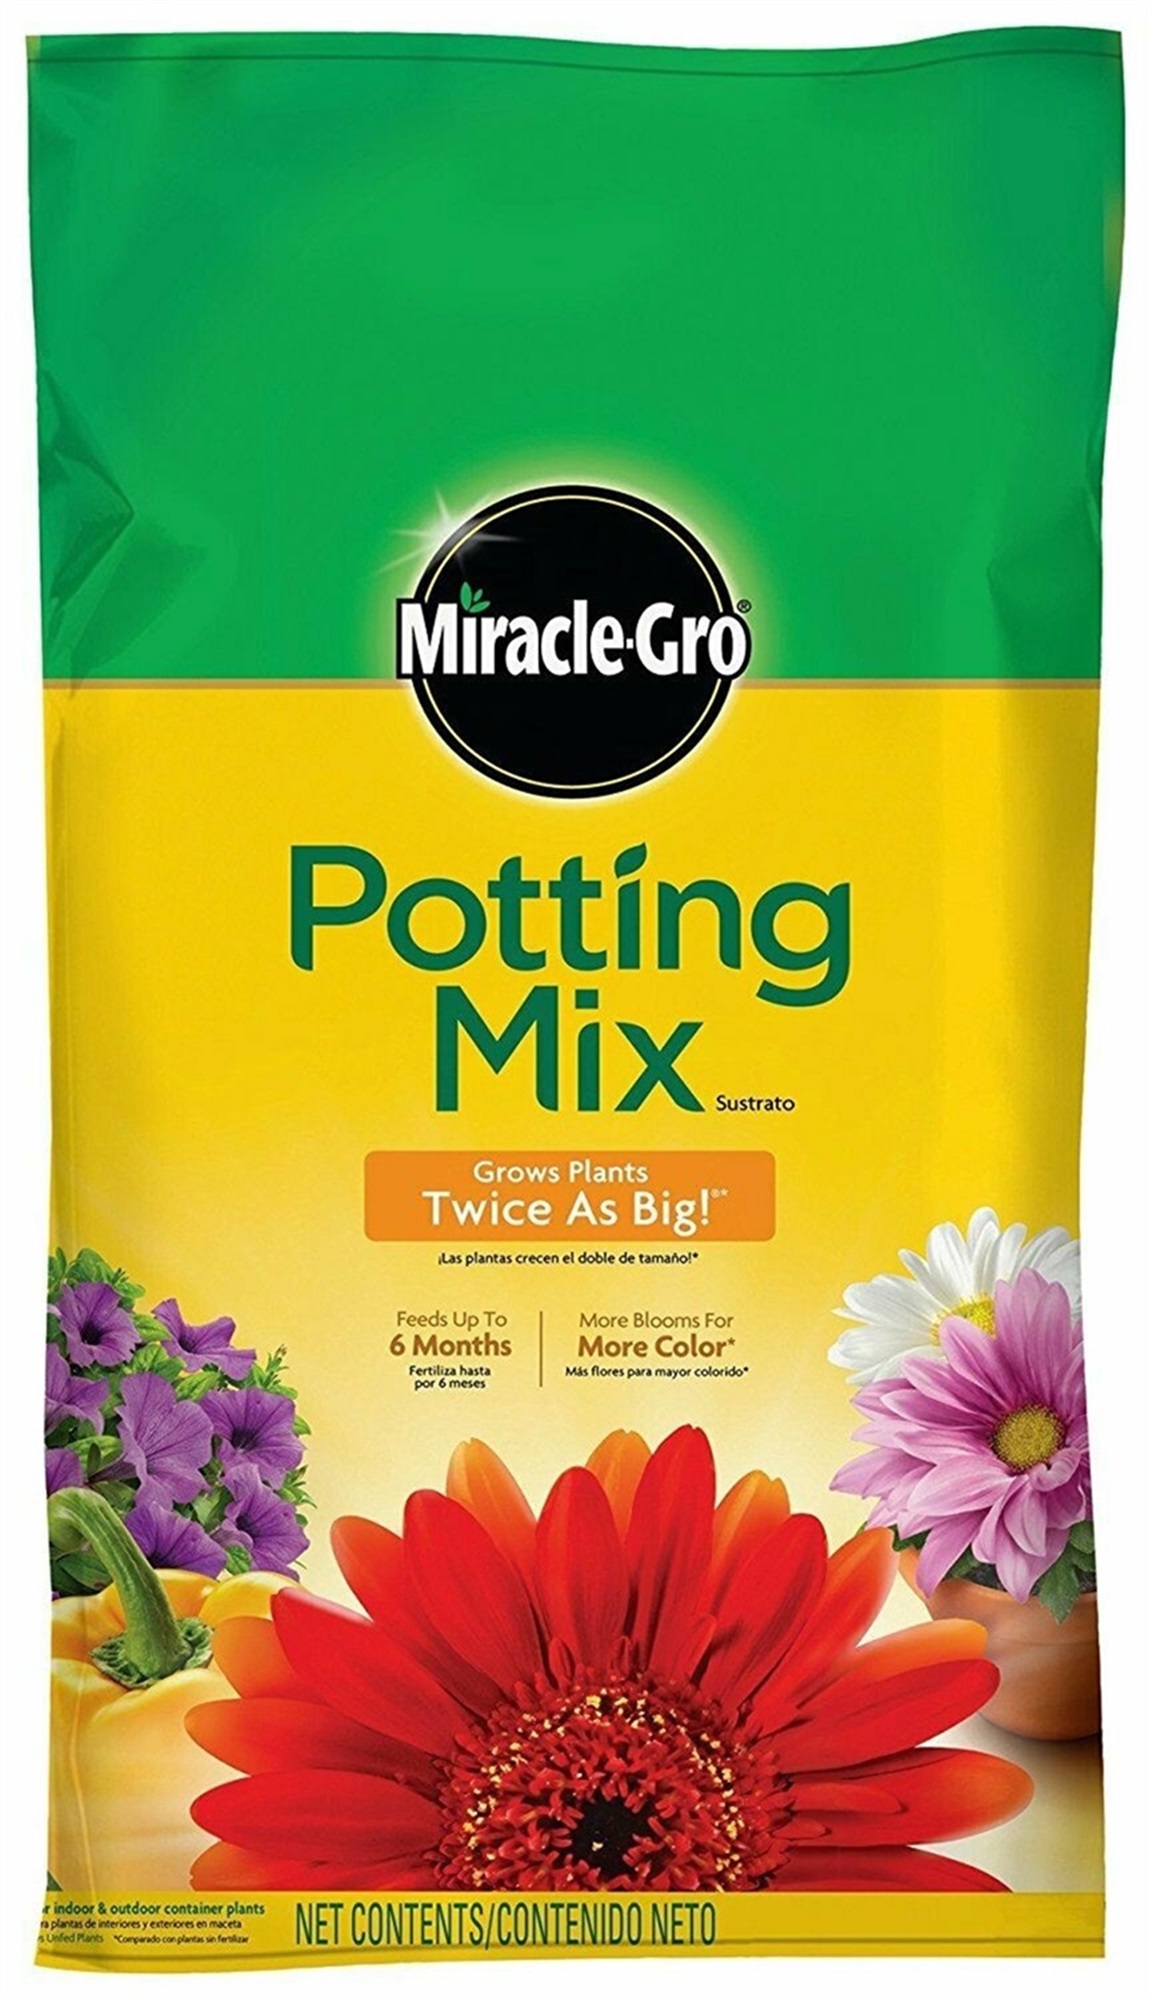 Miracle-Gro Potting Mix 1 cu. ft., For Use With Container Plants - image 1 of 5